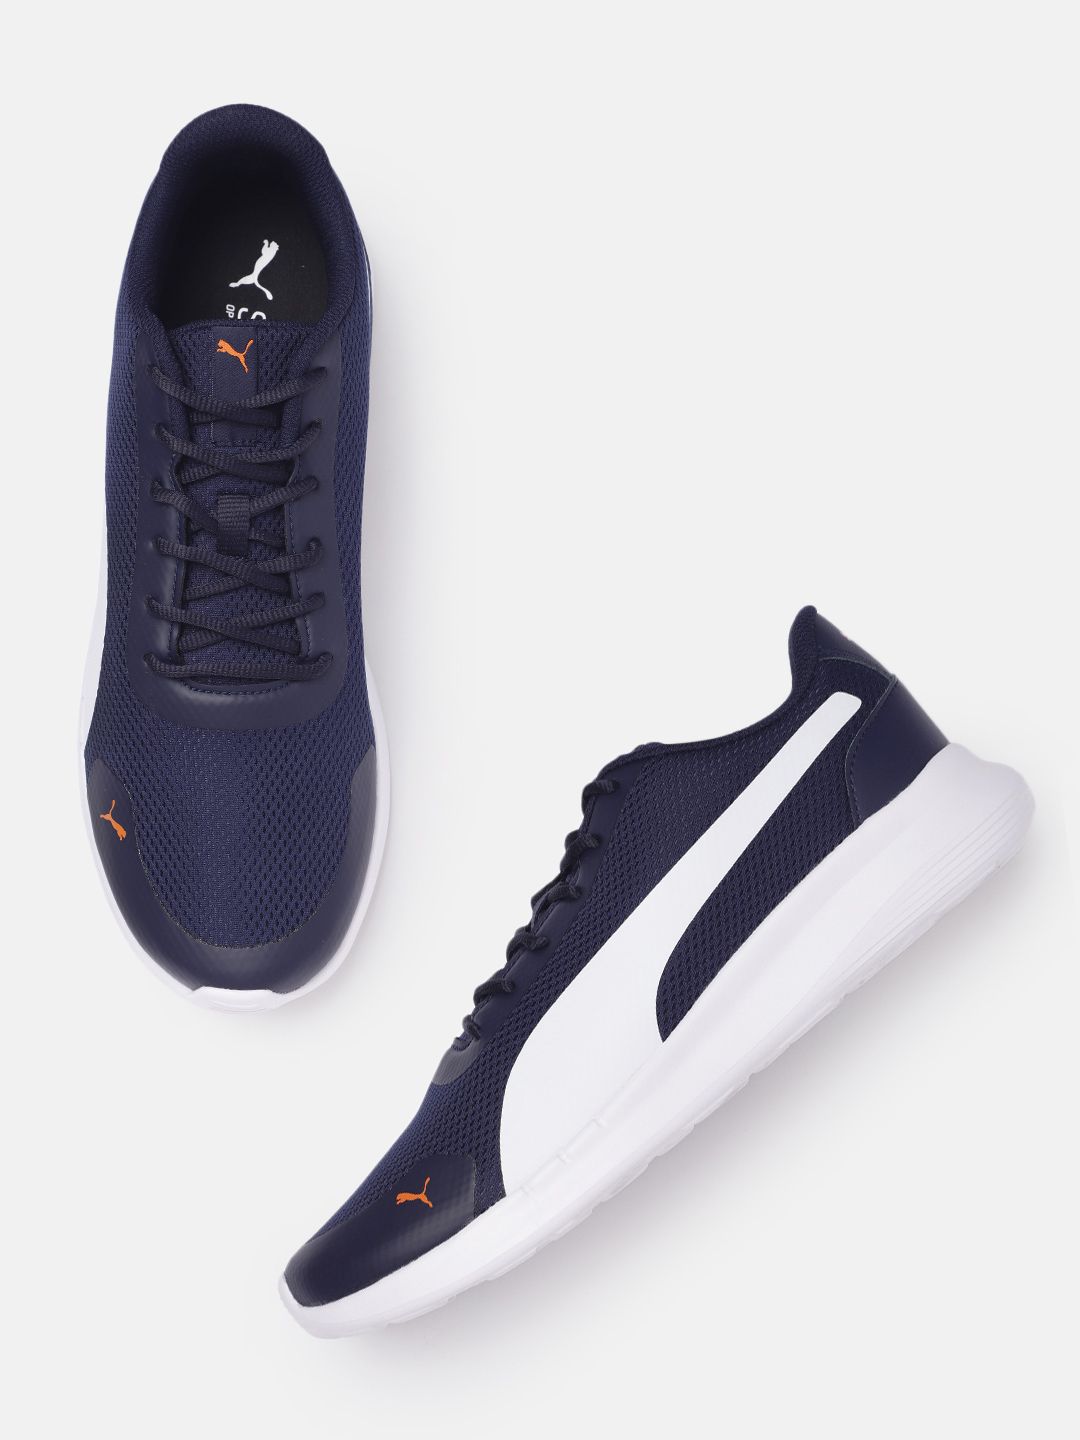 Puma Unisex Navy Blue Cave V3 Sneakers Price in India